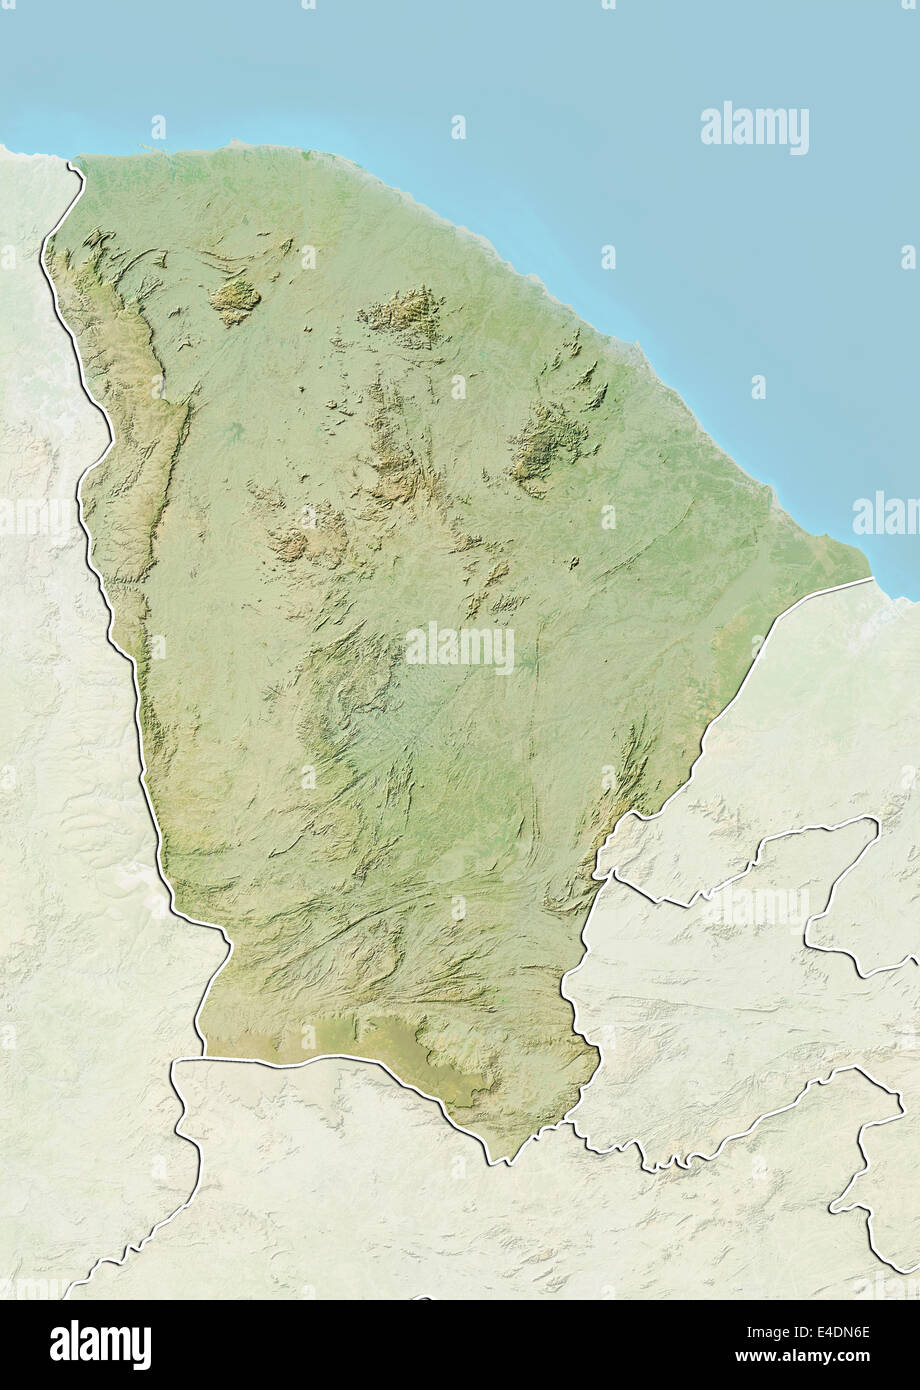 State of Ceara, Brazil, Relief Map Stock Photo